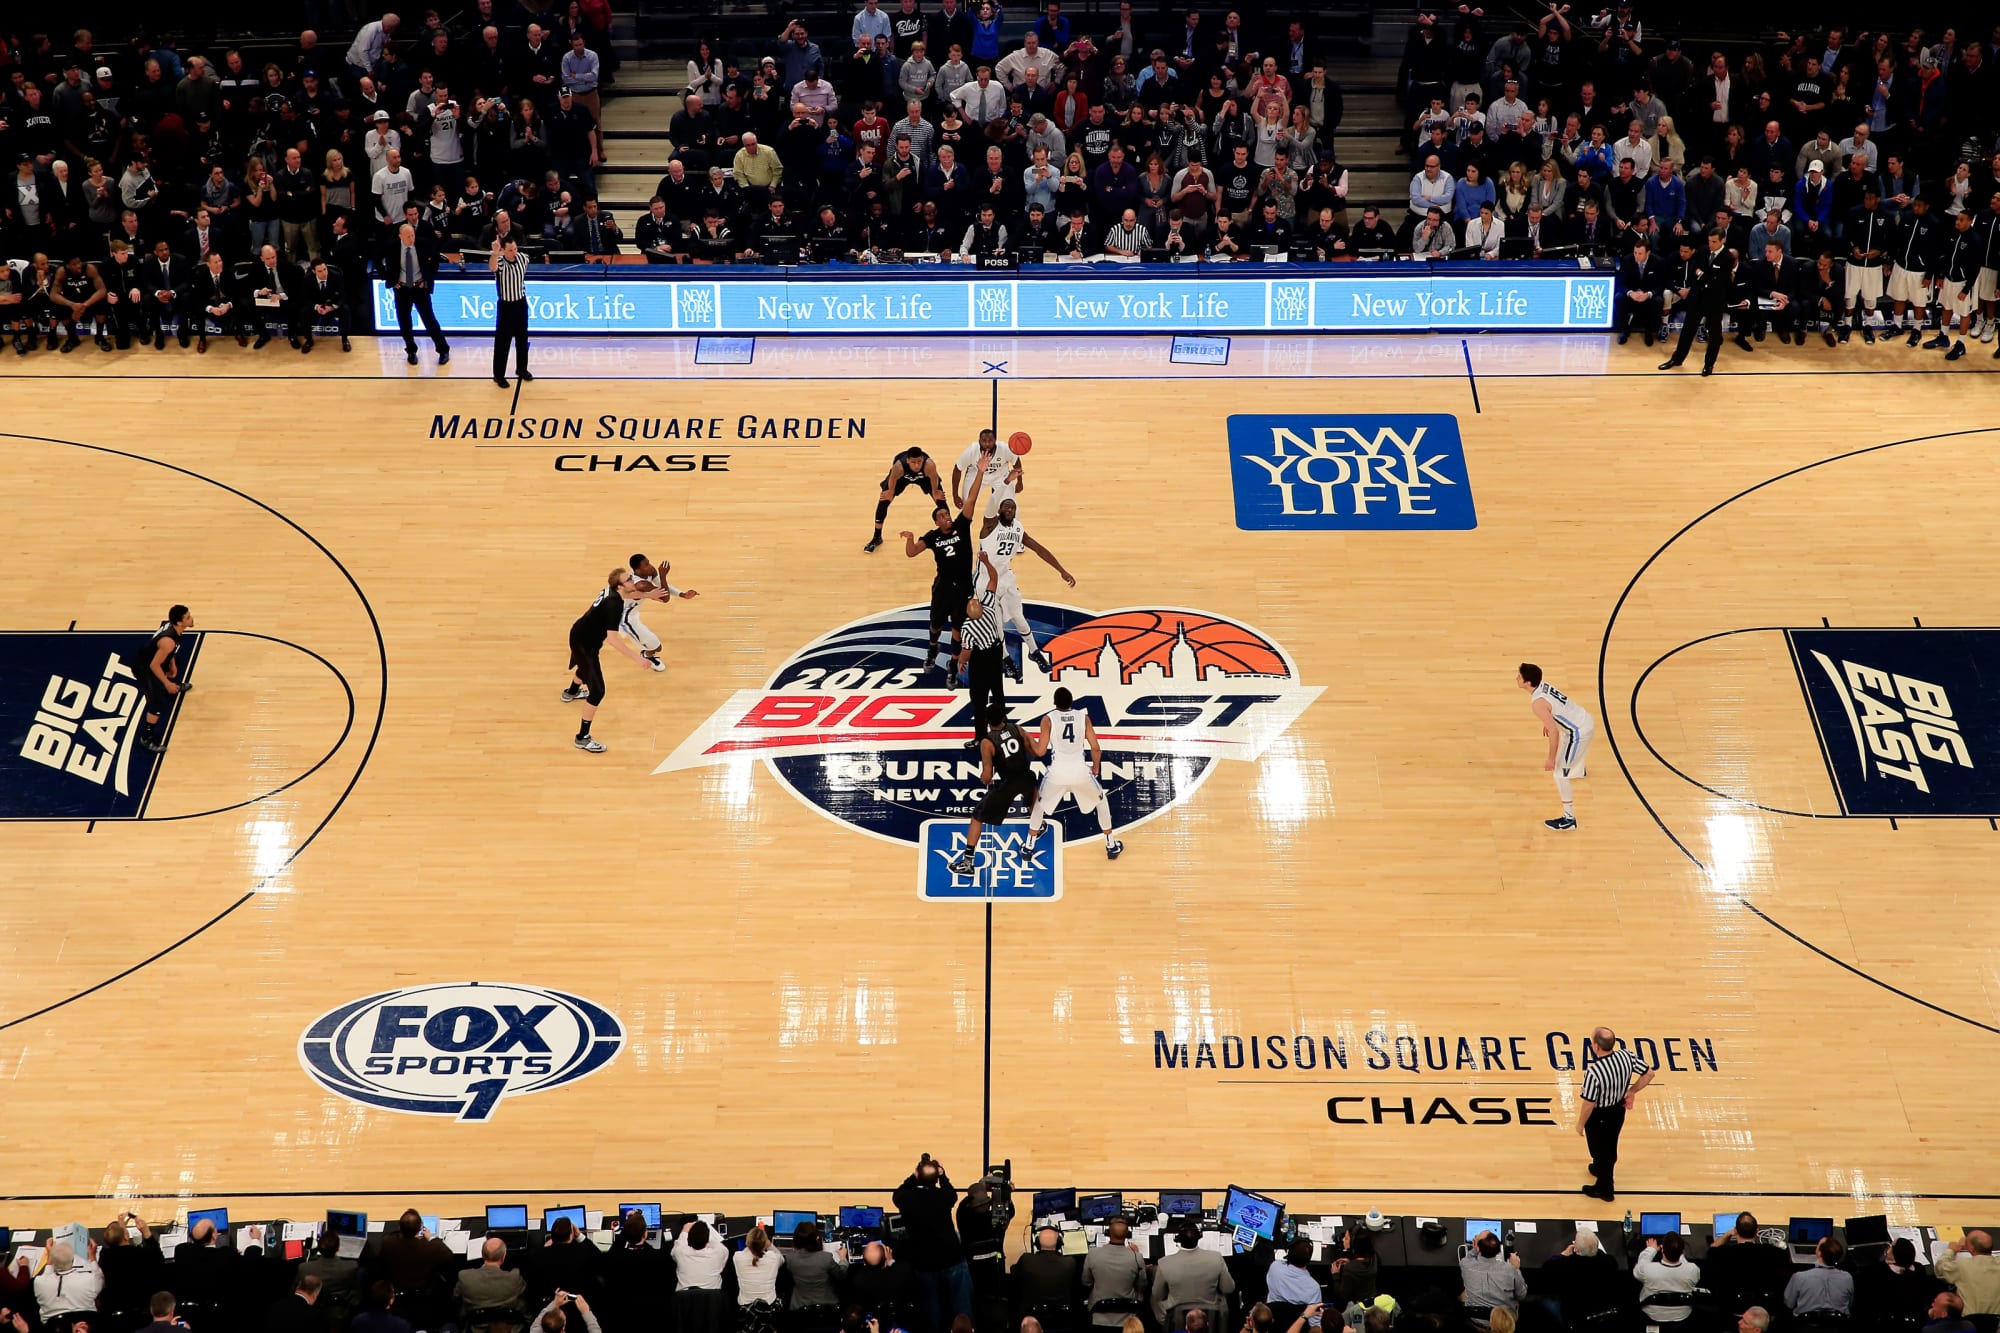 Big East Basketball Could expansion force conference realignment?